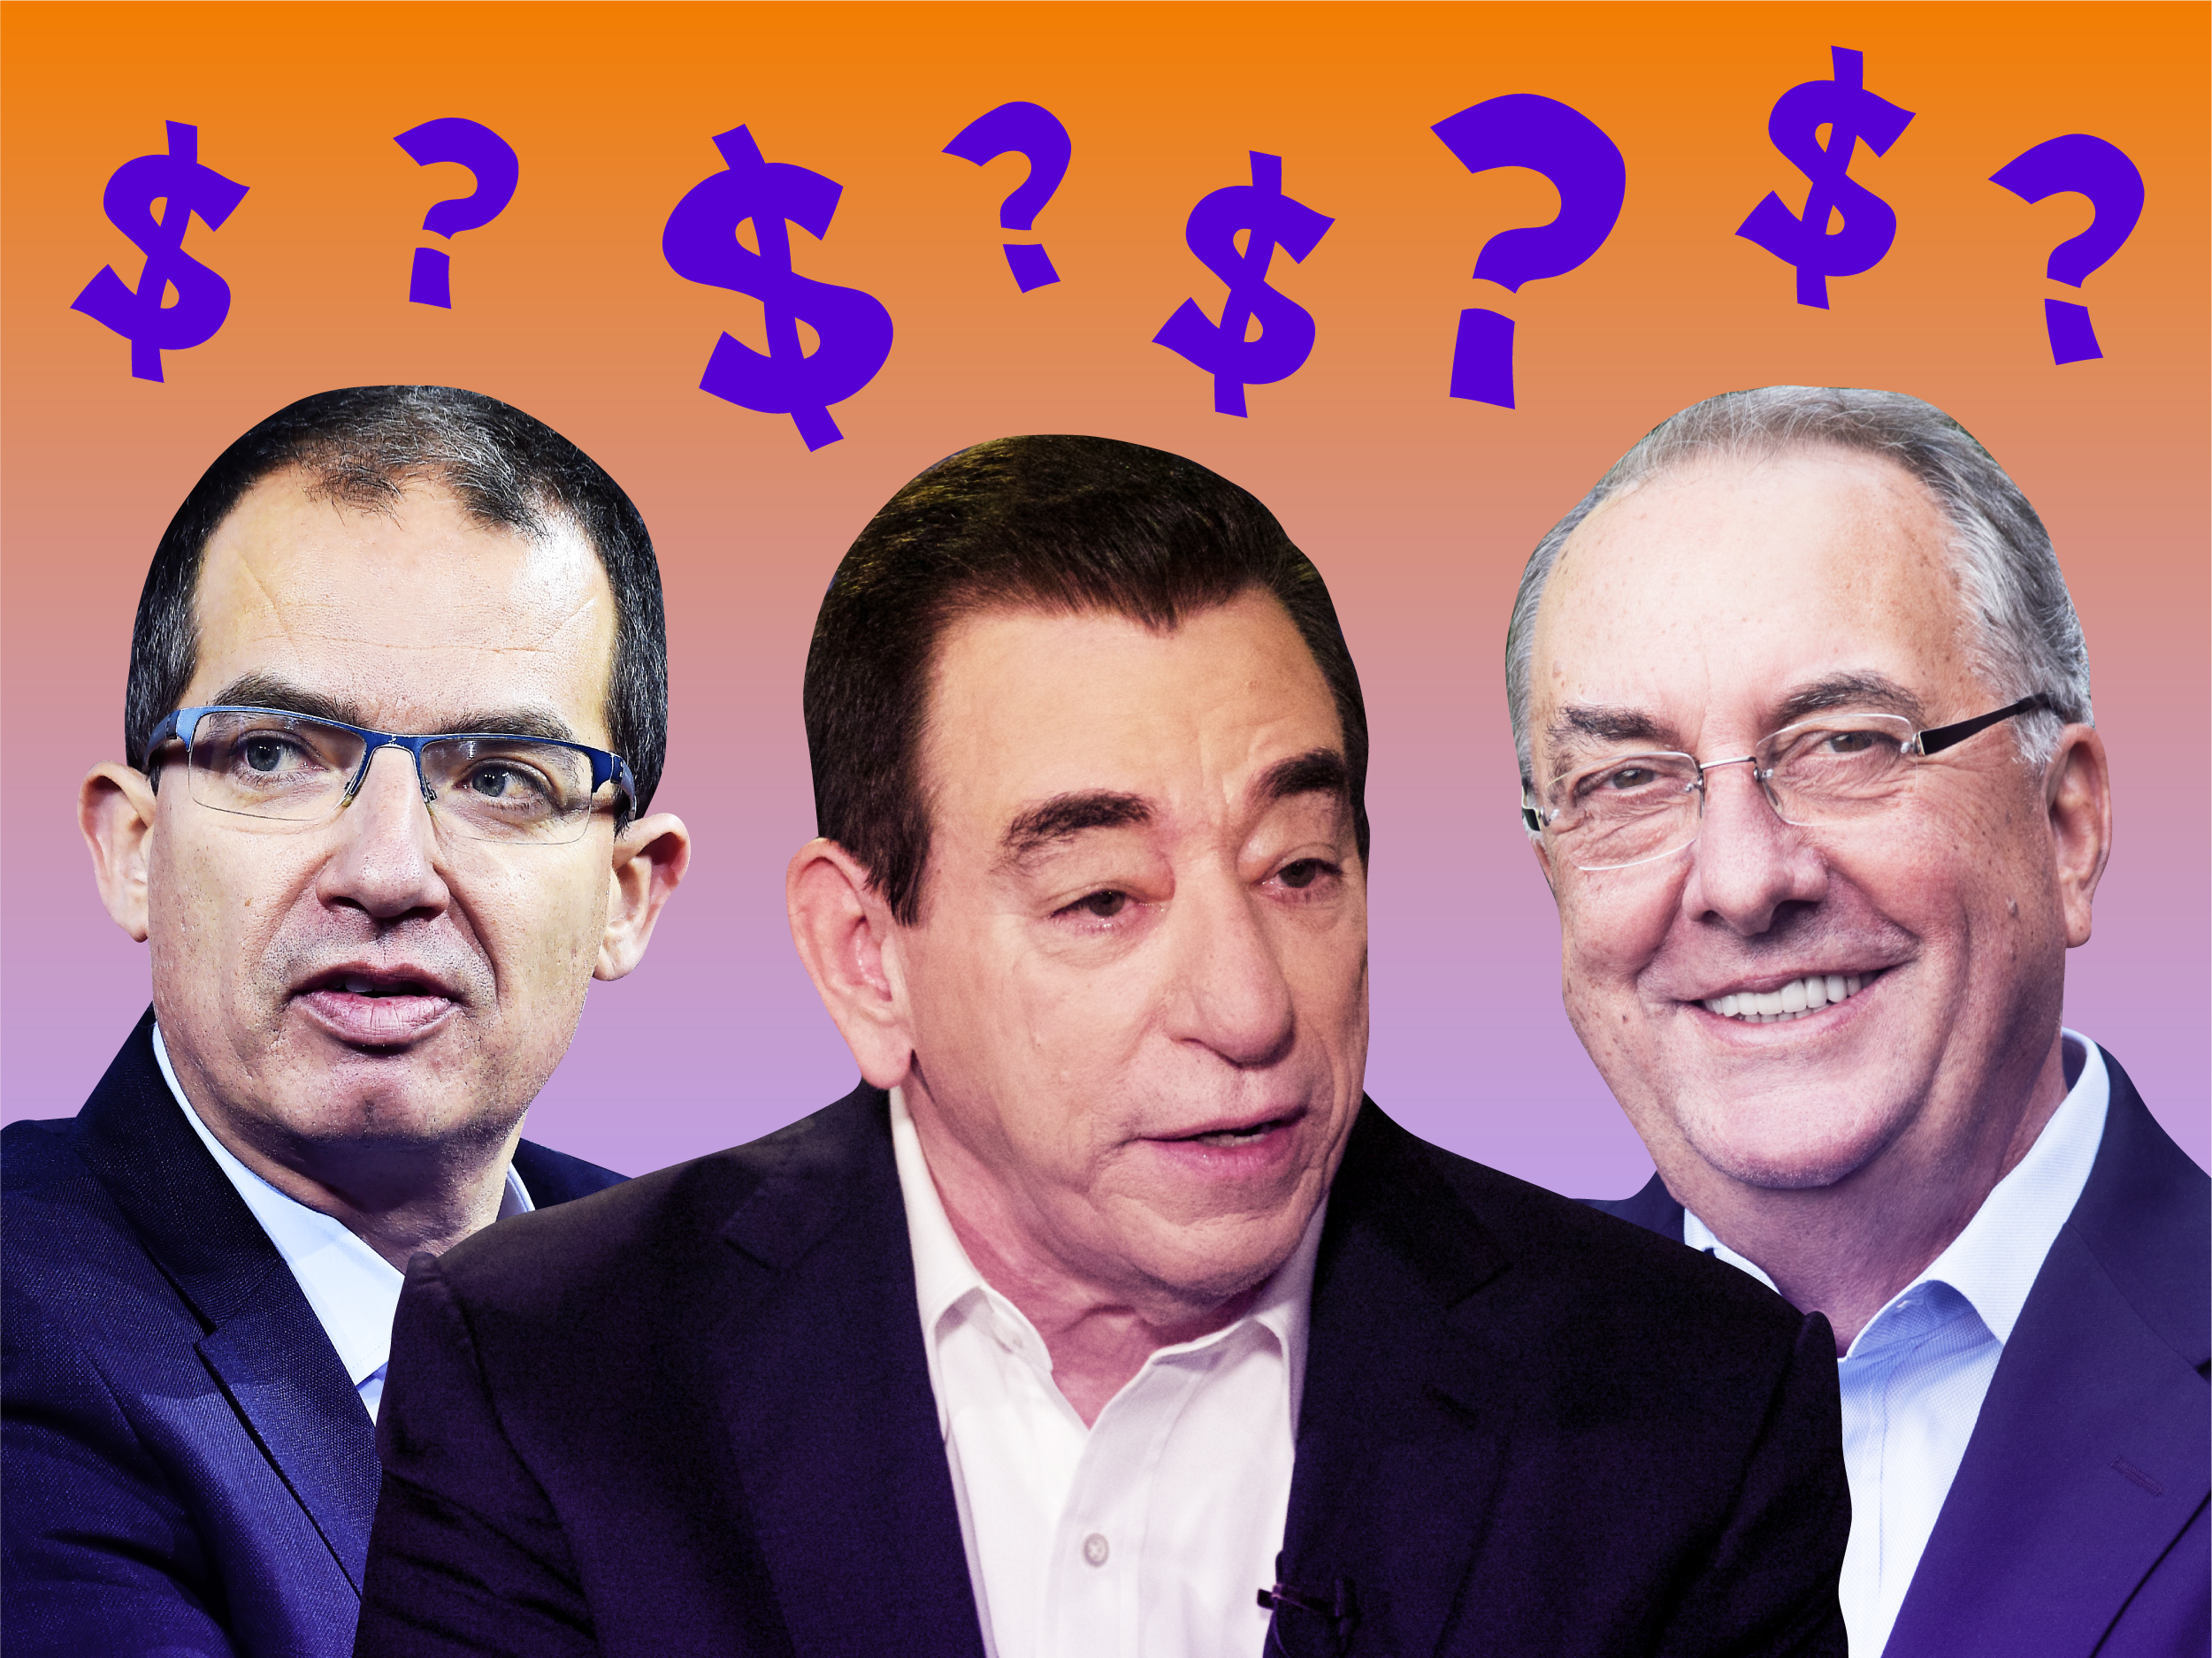 Stephane Bance, CEO of Moderna, Leonard Schleifer, founder and chief executive of the biotechnology company Regeneron, and Stanley Erck, CEO of Novavax on an orange background surrounded by purple question marks and dollar signs.